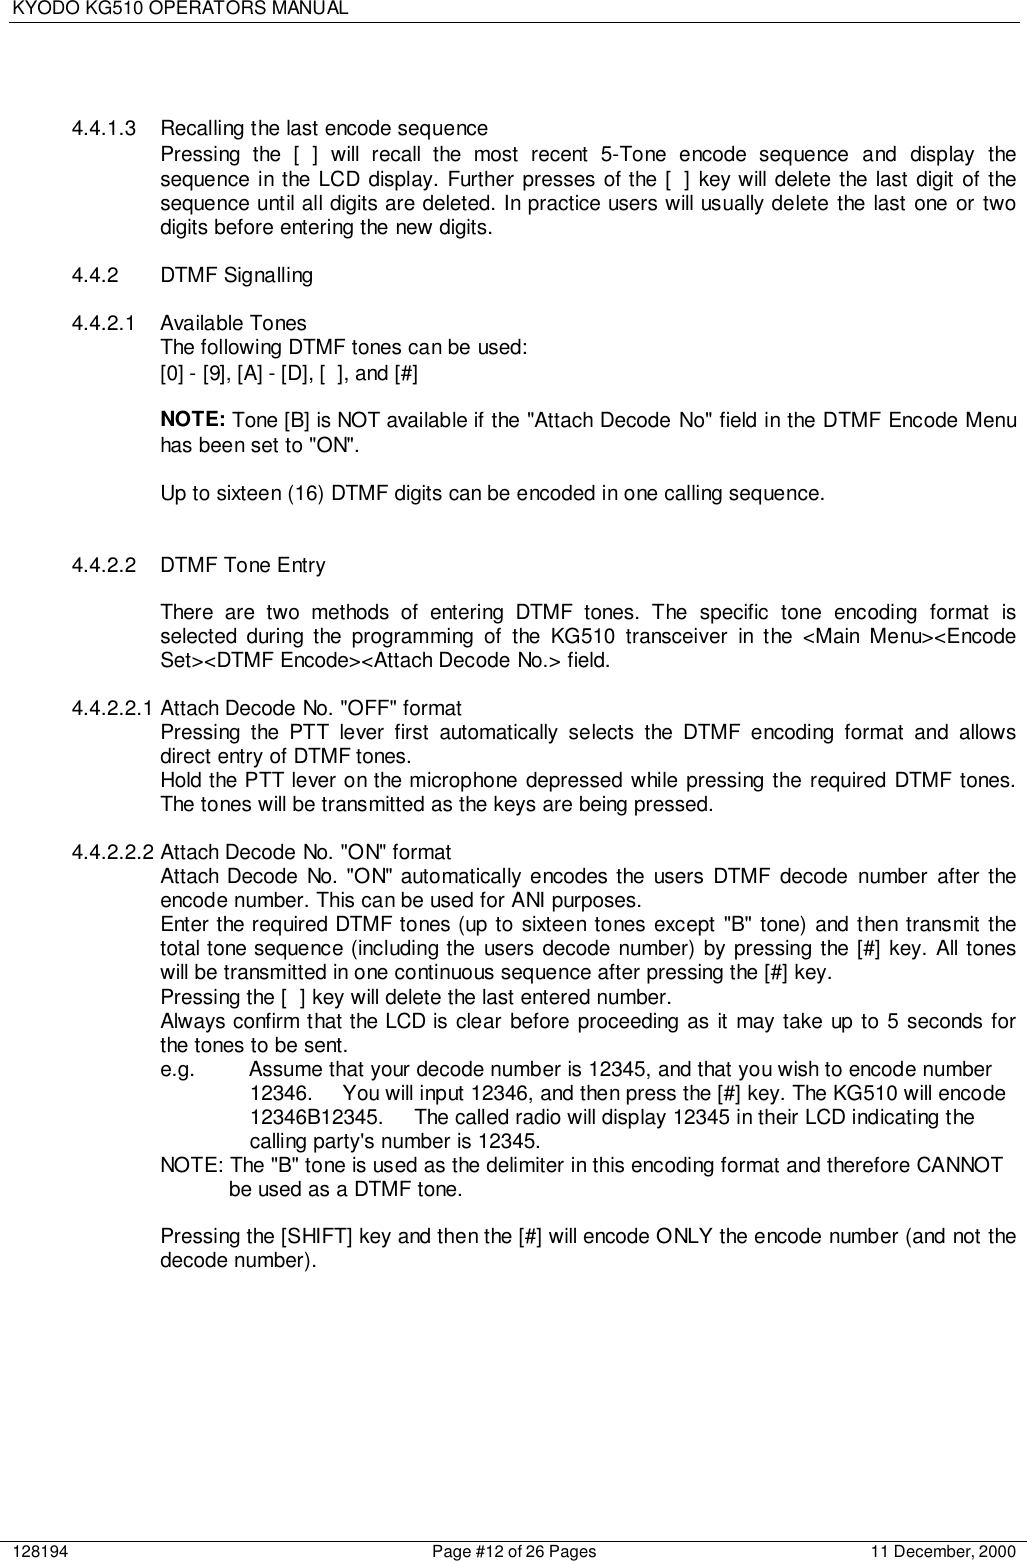 KYODO KG510 OPERATORS MANUAL128194 Page #12 of 26 Pages 11 December, 20004.4.1.3 Recalling the last encode sequencePressing the [ ] will recall the most recent 5-Tone encode sequence and display thesequence in the LCD display. Further presses of the [ ] key will delete the last digit of thesequence until all digits are deleted. In practice users will usually delete the last one or twodigits before entering the new digits.4.4.2 DTMF Signalling4.4.2.1 Available TonesThe following DTMF tones can be used:[0] - [9], [A] - [D], [ ], and [#]NOTE: Tone [B] is NOT available if the &quot;Attach Decode No&quot; field in the DTMF Encode Menuhas been set to &quot;ON&quot;.Up to sixteen (16) DTMF digits can be encoded in one calling sequence.4.4.2.2  DTMF Tone EntryThere are two methods of entering DTMF tones. The specific tone encoding format isselected during the programming of the KG510 transceiver in the &lt;Main Menu&gt;&lt;EncodeSet&gt;&lt;DTMF Encode&gt;&lt;Attach Decode No.&gt; field.4.4.2.2.1 Attach Decode No. &quot;OFF&quot; formatPressing the PTT lever first automatically selects the DTMF encoding format and allowsdirect entry of DTMF tones.Hold the PTT lever on the microphone depressed while pressing the required DTMF tones.The tones will be transmitted as the keys are being pressed.4.4.2.2.2 Attach Decode No. &quot;ON&quot; formatAttach Decode No. &quot;ON&quot; automatically encodes the users DTMF decode number after theencode number. This can be used for ANI purposes.Enter the required DTMF tones (up to sixteen tones except &quot;B&quot; tone) and then transmit thetotal tone sequence (including the users decode number) by pressing the [#] key. All toneswill be transmitted in one continuous sequence after pressing the [#] key.Pressing the [ ] key will delete the last entered number.Always confirm that the LCD is clear before proceeding as it may take up to 5 seconds forthe tones to be sent.e.g. Assume that your decode number is 12345, and that you wish to encode number 12346.     You will input 12346, and then press the [#] key. The KG510 will encode 12346B12345.     The called radio will display 12345 in their LCD indicating the calling party&apos;s number is 12345.NOTE: The &quot;B&quot; tone is used as the delimiter in this encoding format and therefore CANNOT be used as a DTMF tone.Pressing the [SHIFT] key and then the [#] will encode ONLY the encode number (and not thedecode number).